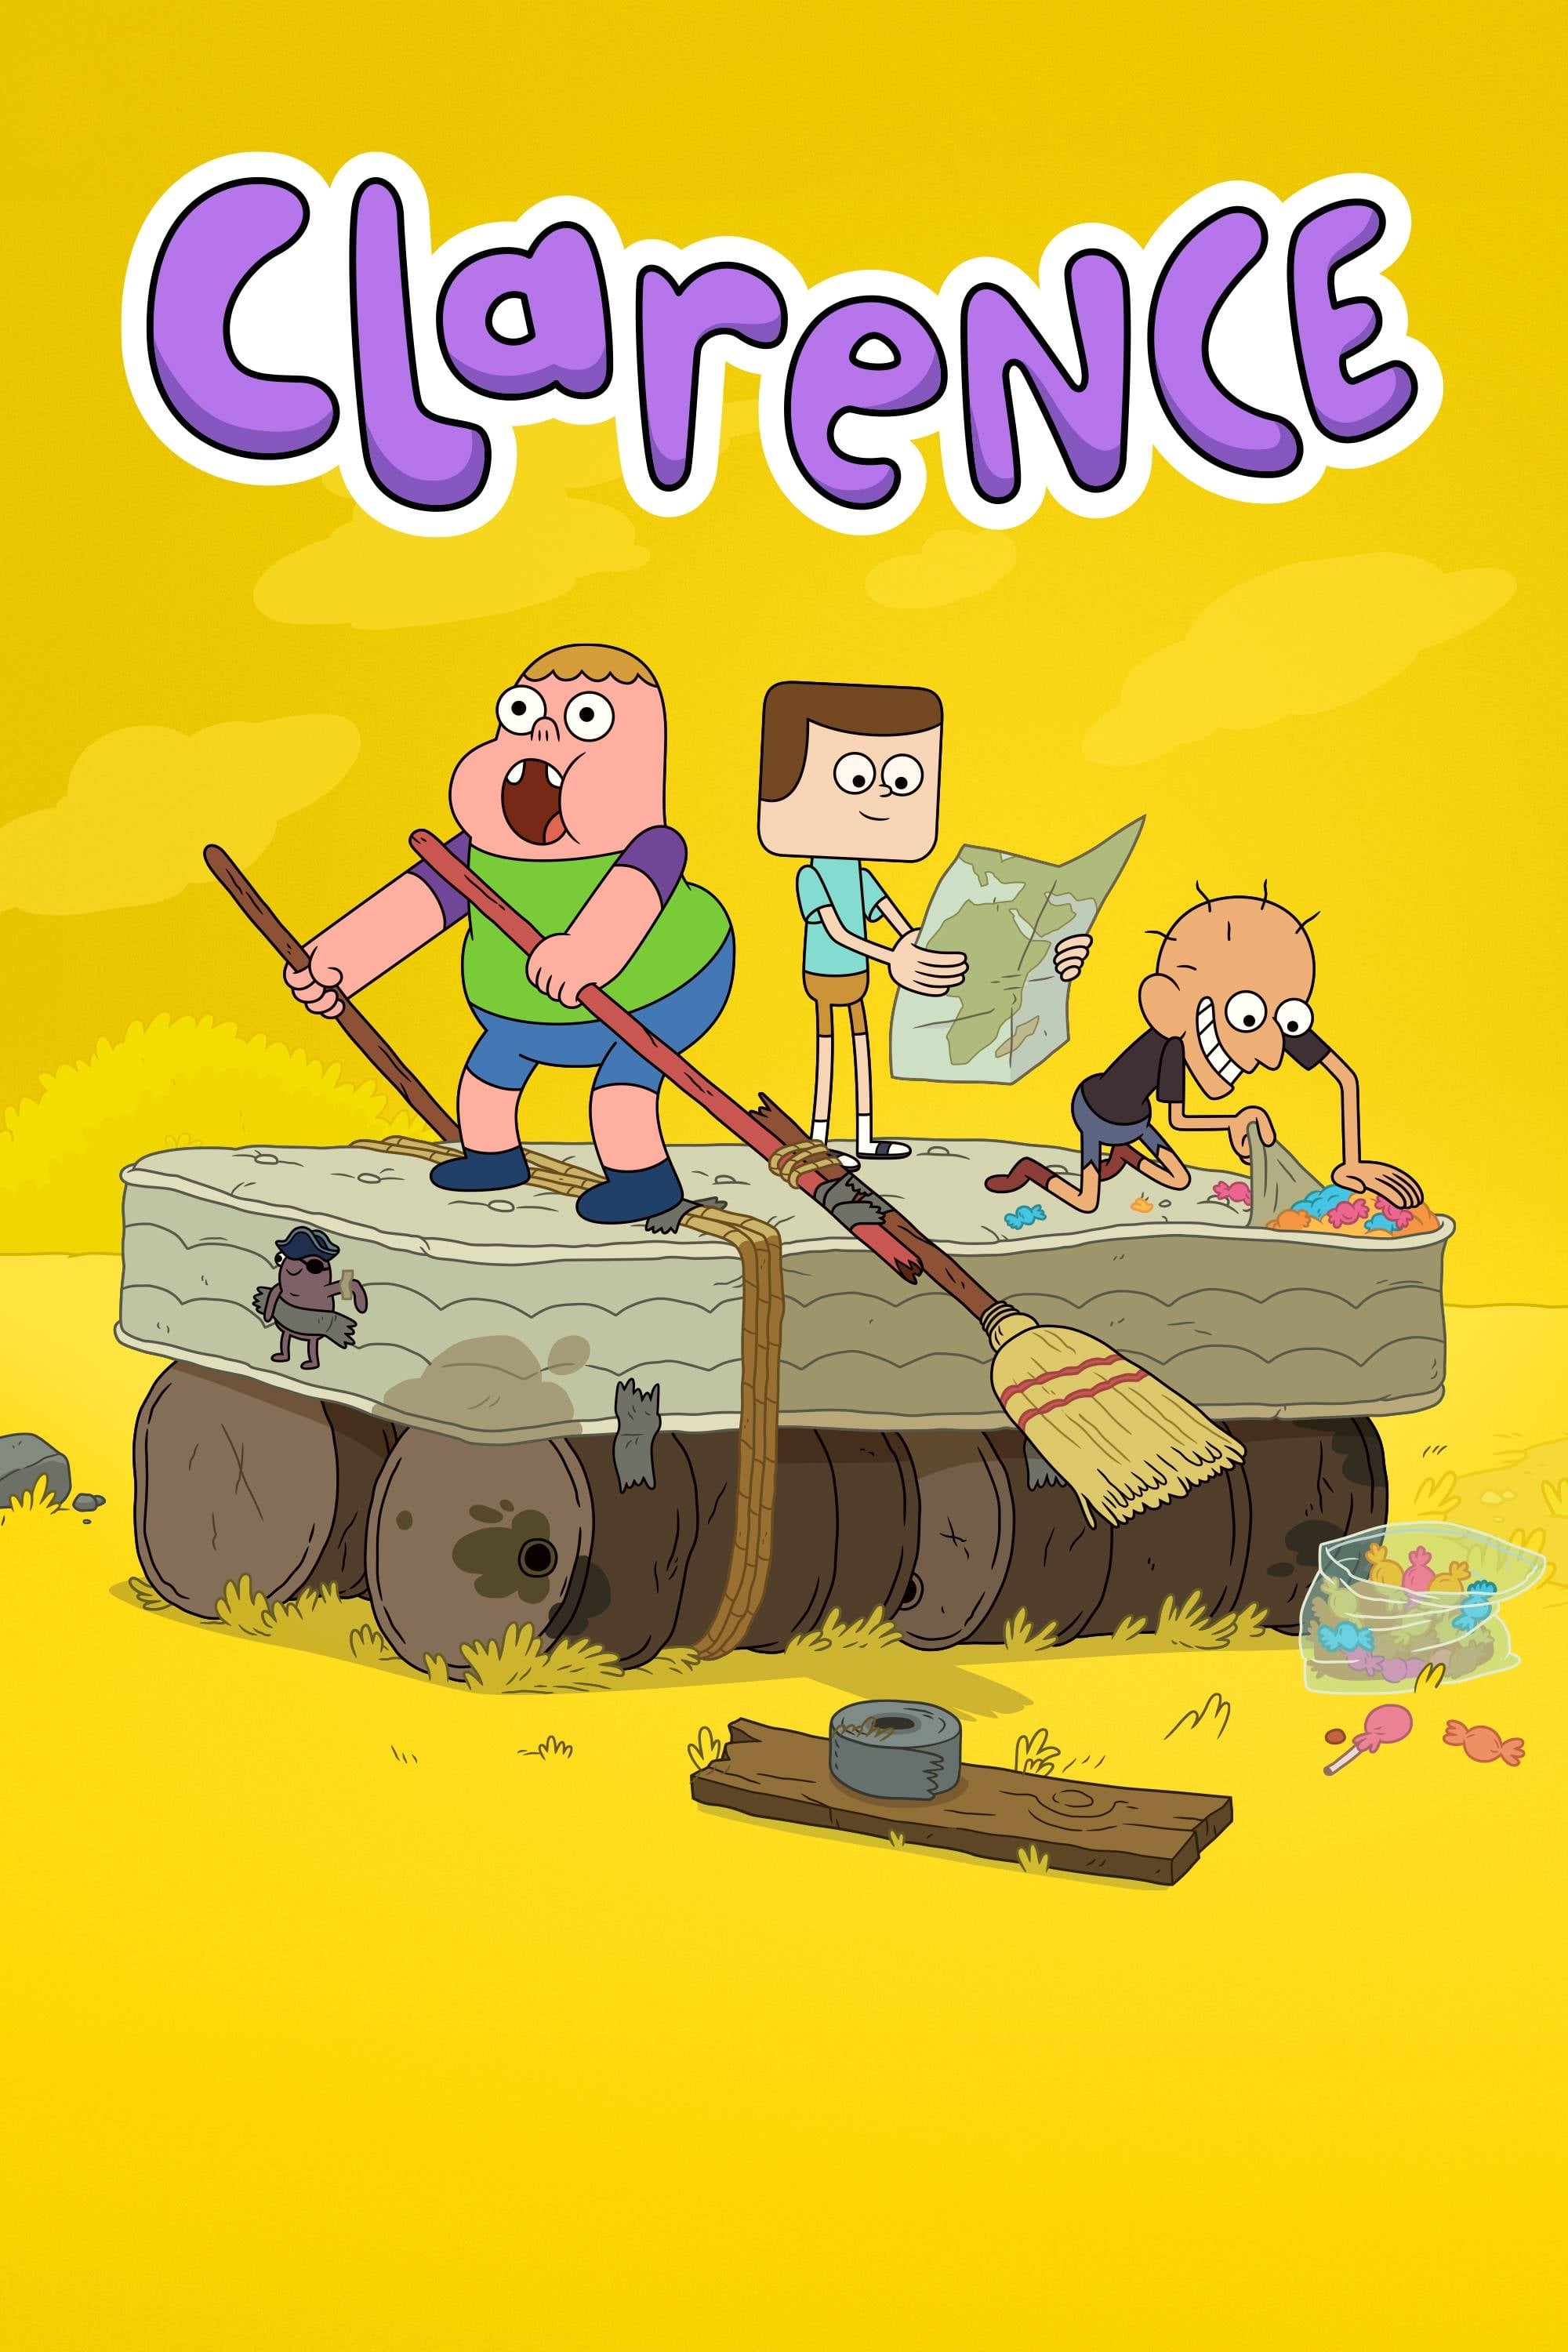 KaBOOM! & Cartoon Network's 'Clarence' to be released June 10th